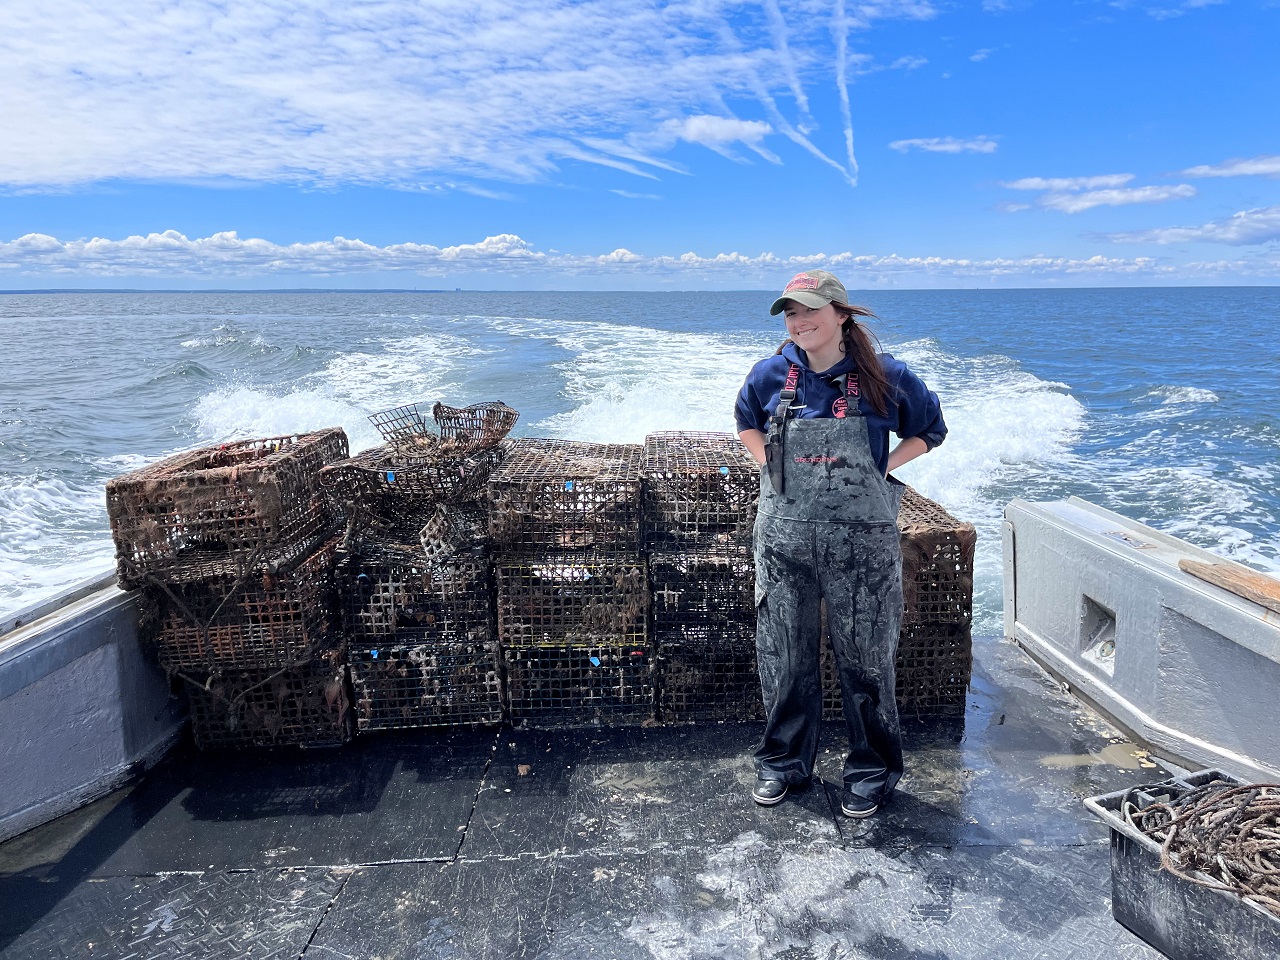 Emma on boat with lobster traps